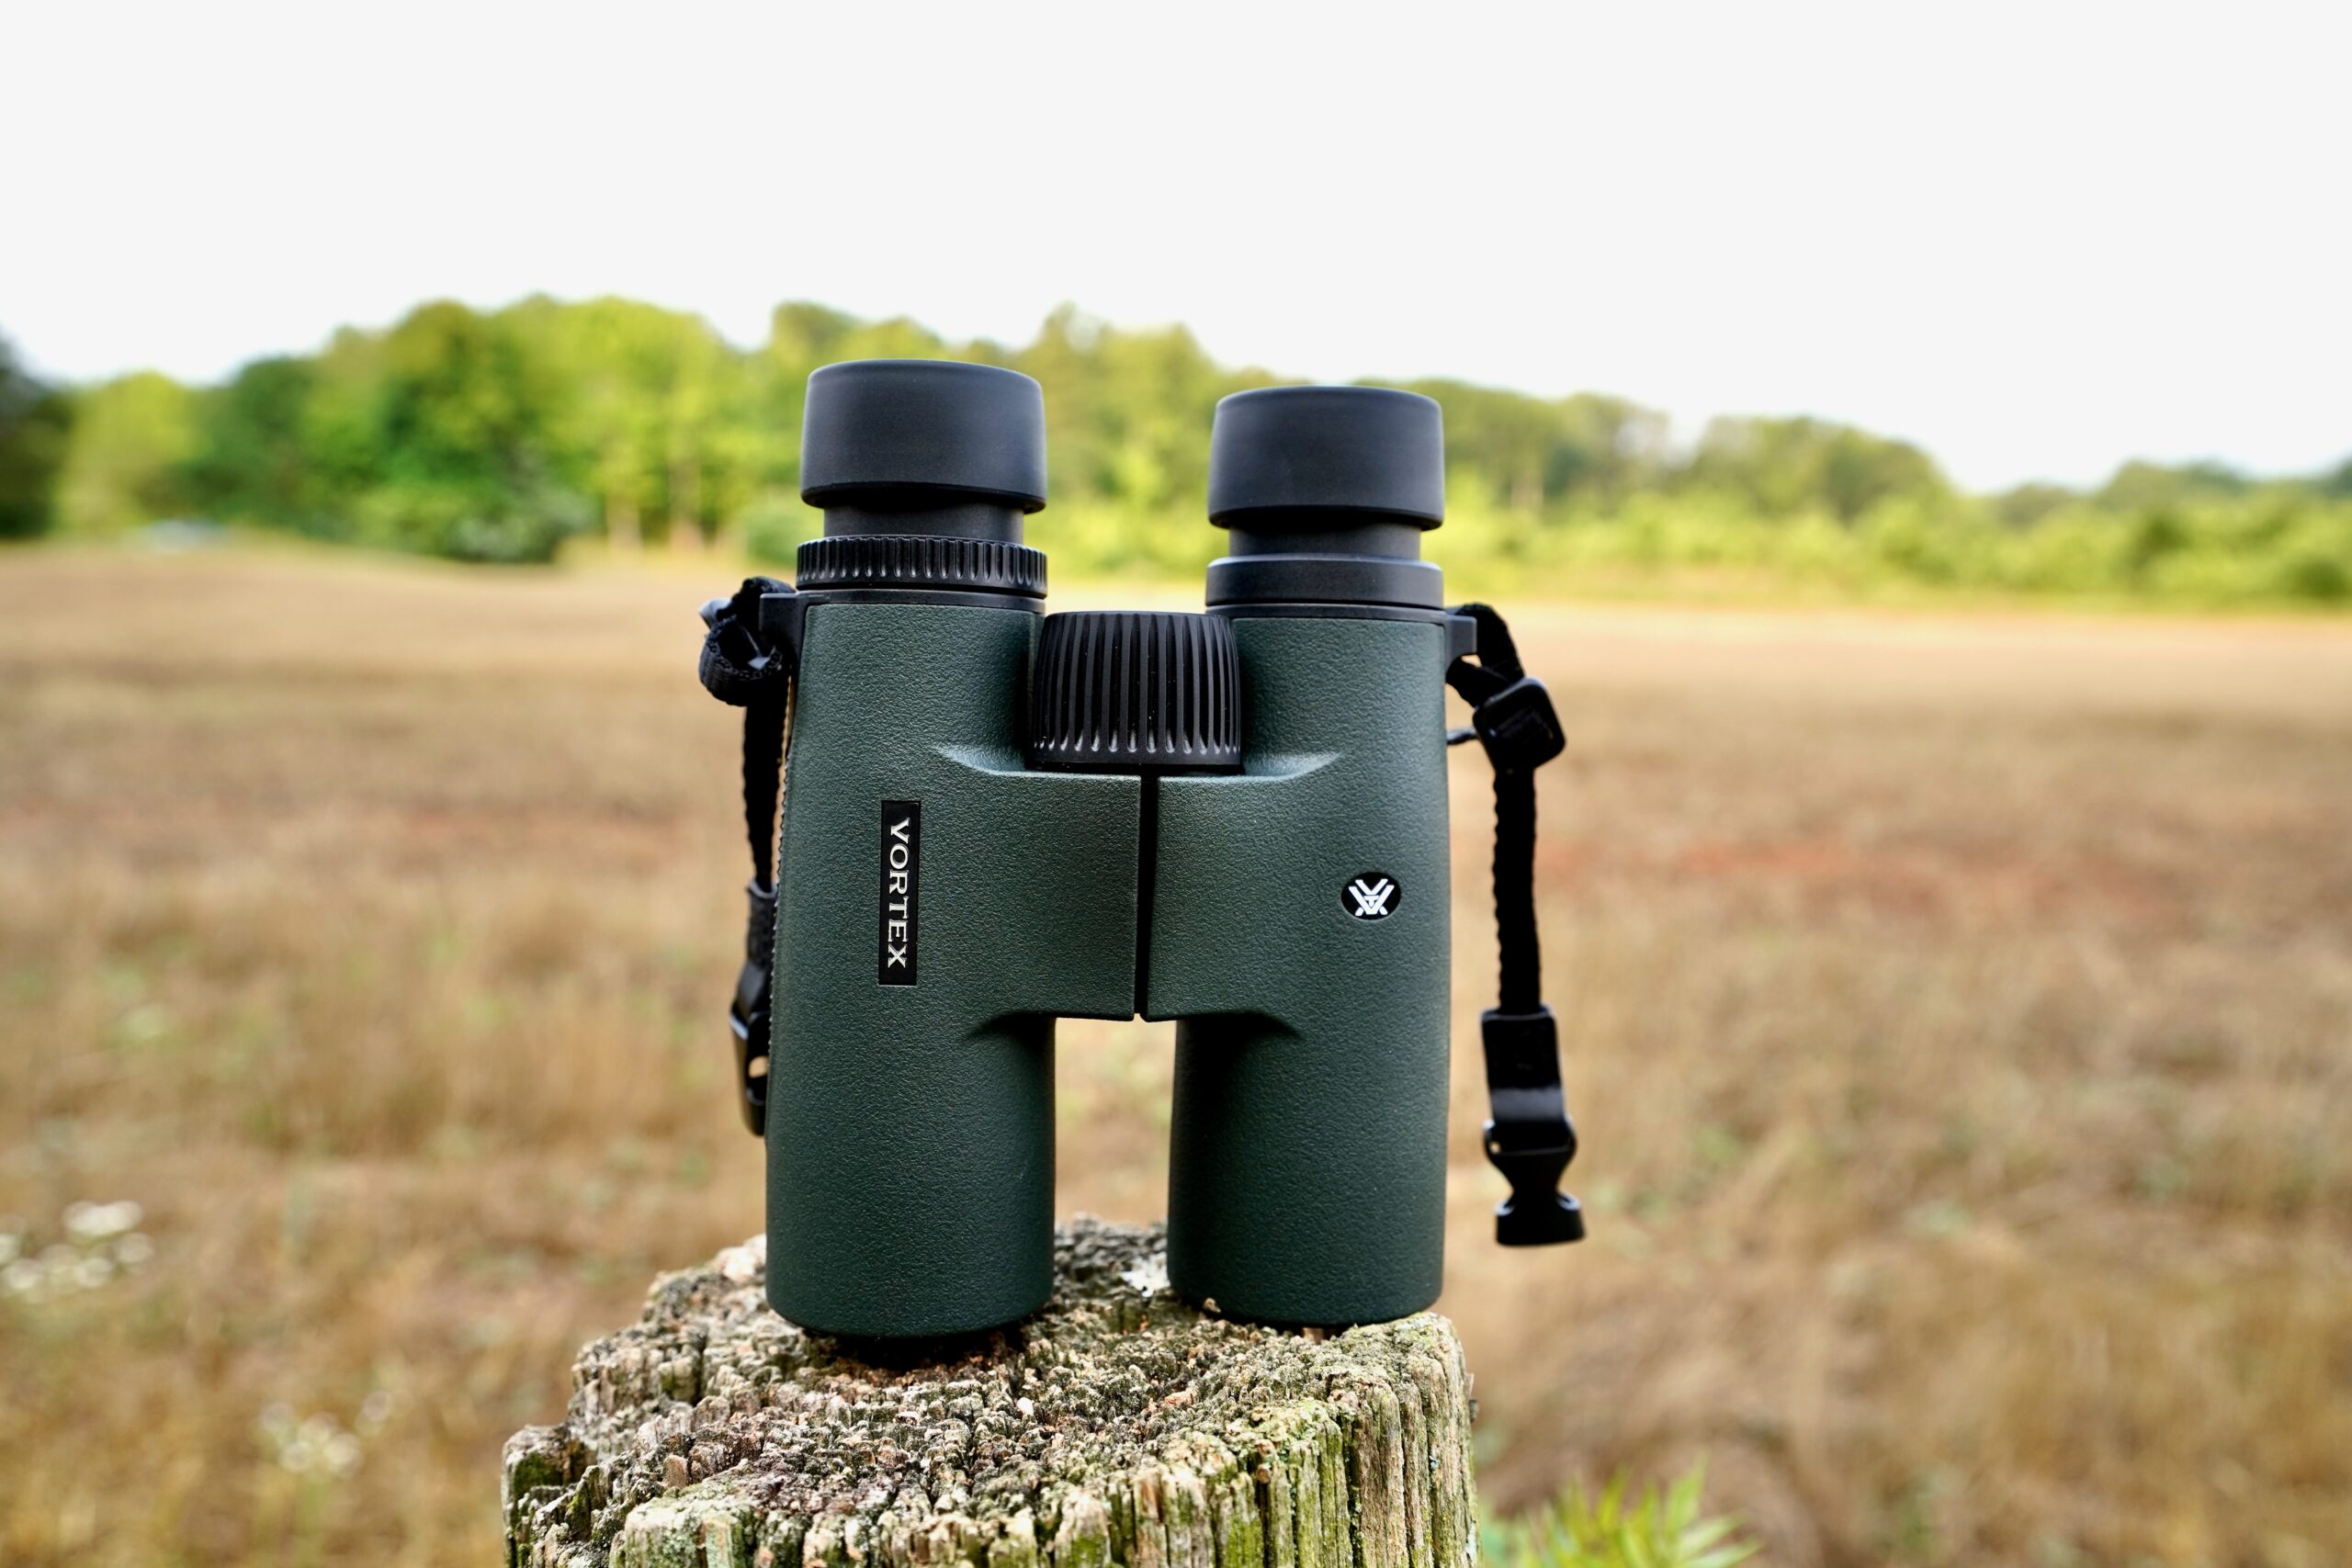 The new Vortex Triumph HD binocular was put to the test in the field and at the range.